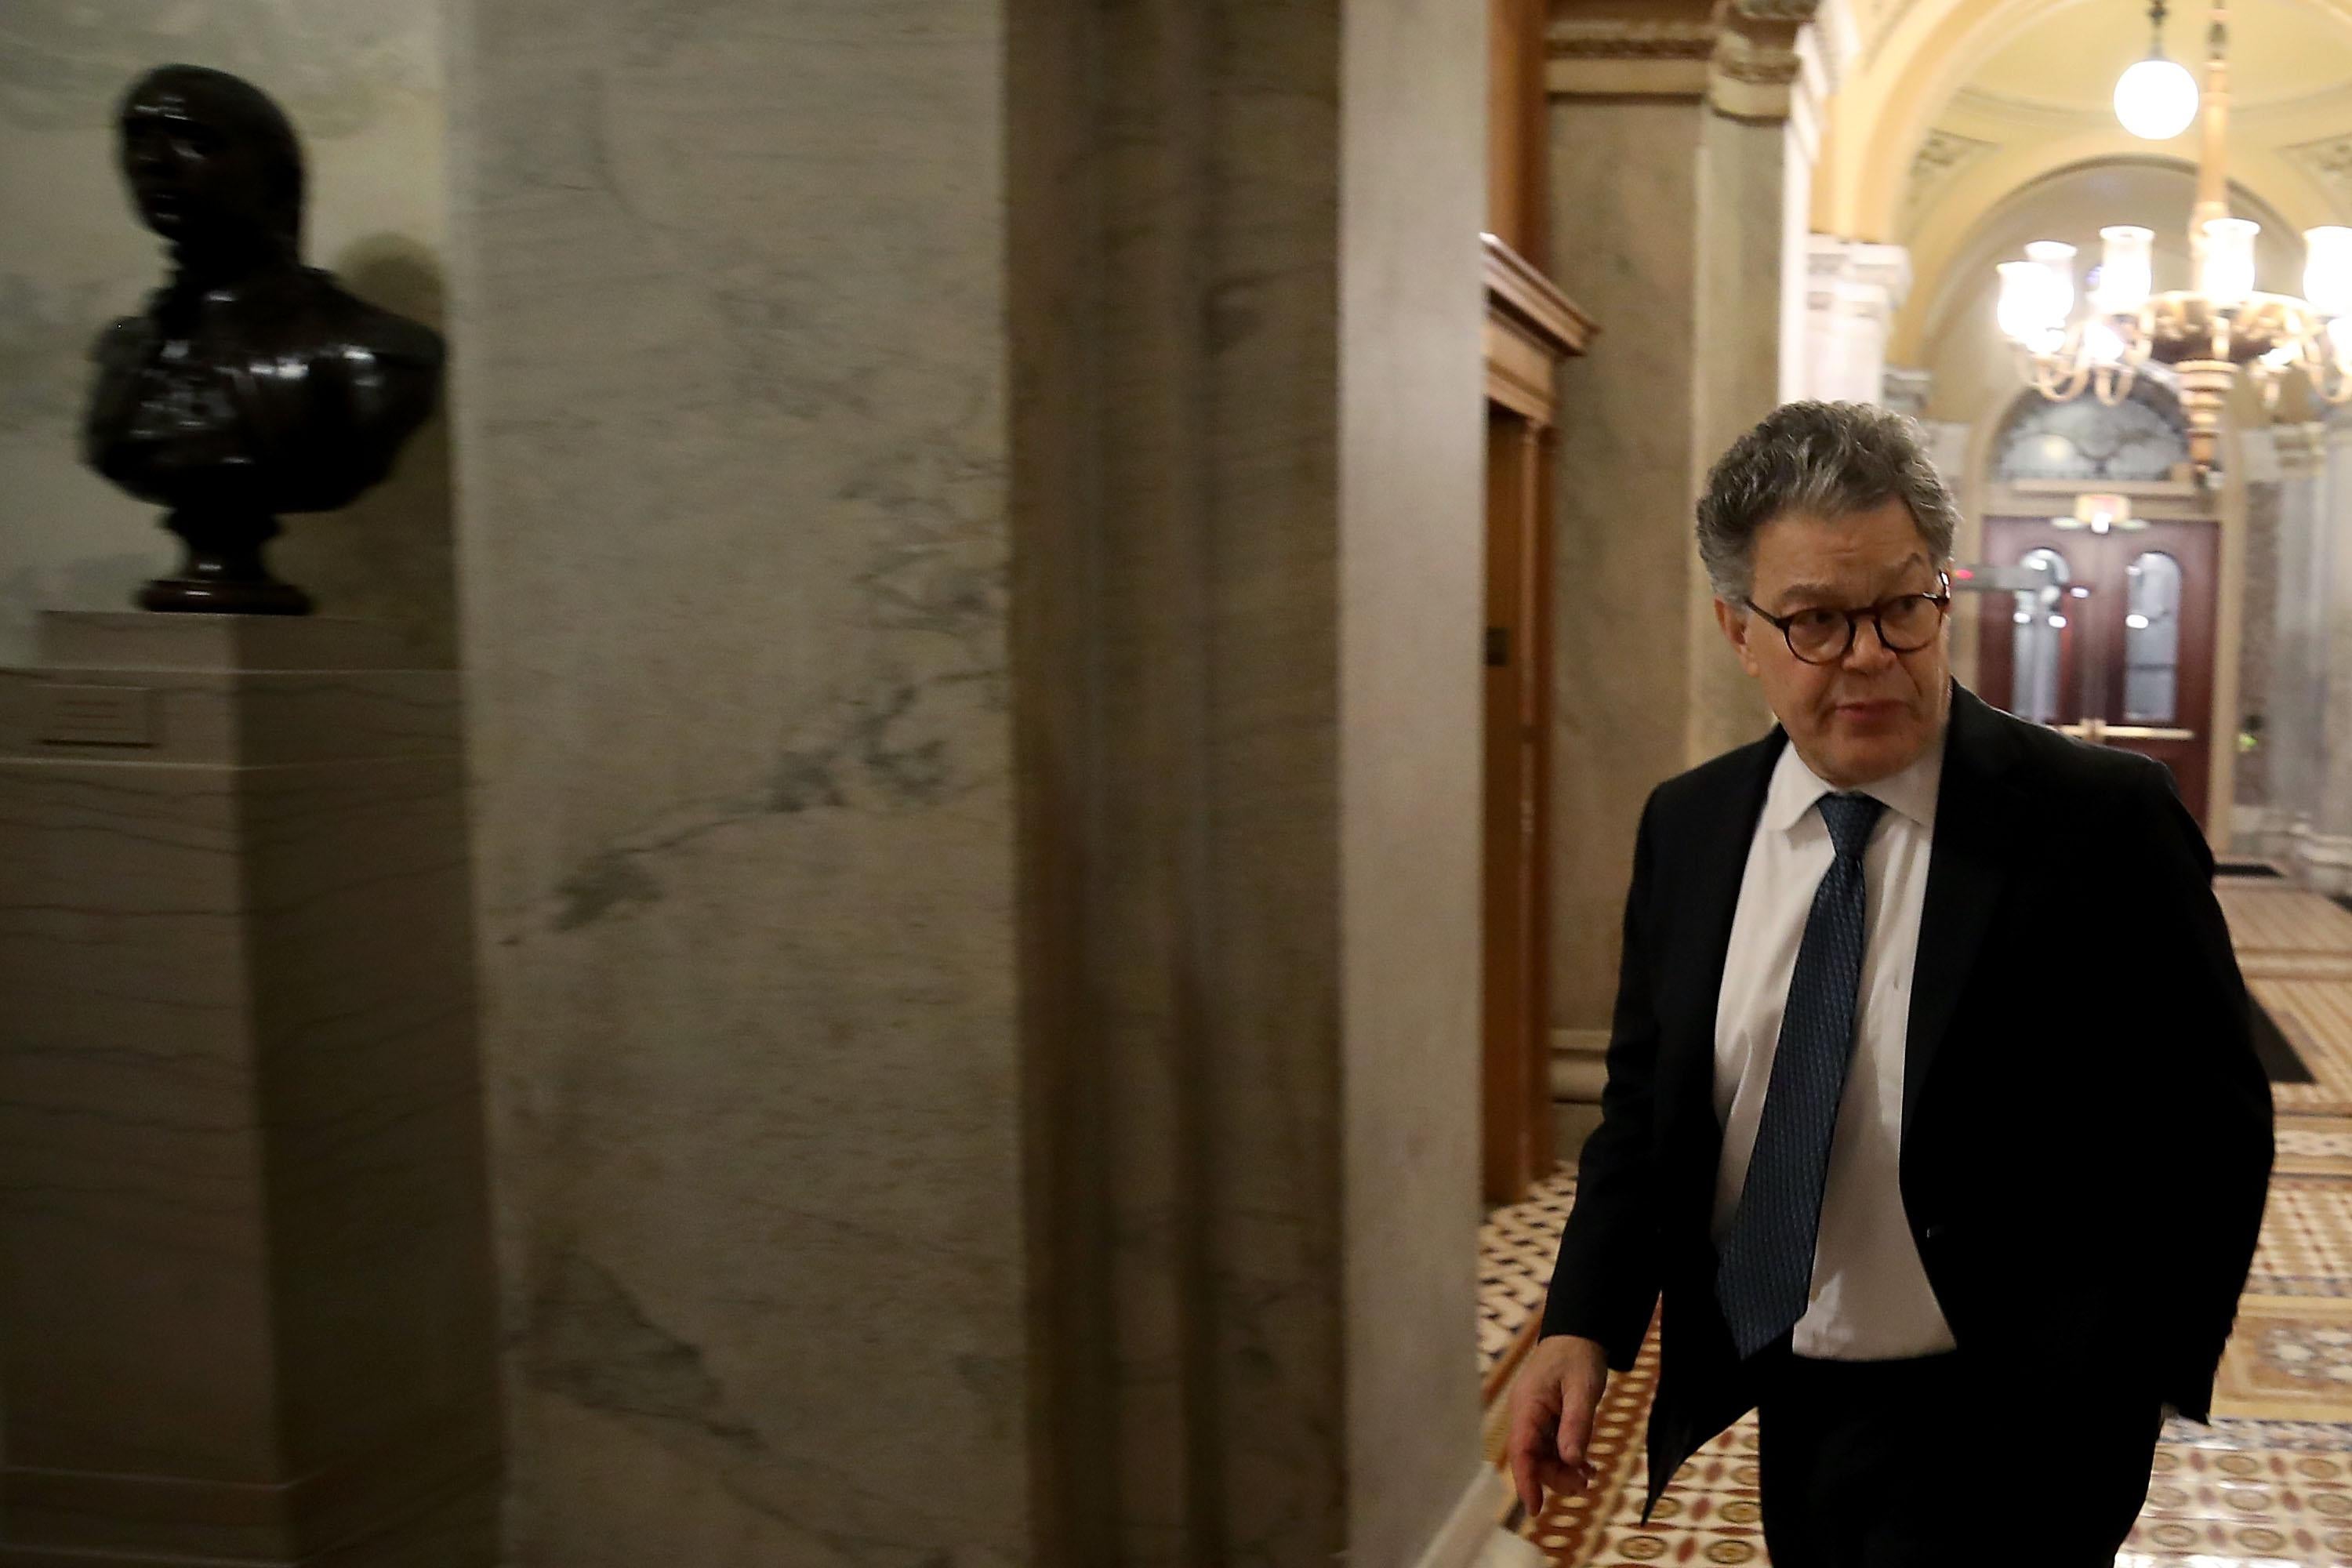 WASHINGTON, DC - NOVEMBER 30:  U.S. Sen. Al Franken (D-MN) arrives to cast a vote in the Senate Chamber inside of the  U.S. Capitol building November 30, 2017 in Washington, DC. Senate Republicans are poised to pass sweeping tax cuts as early as Friday.  (Photo by Mark Wilson/Getty Images)